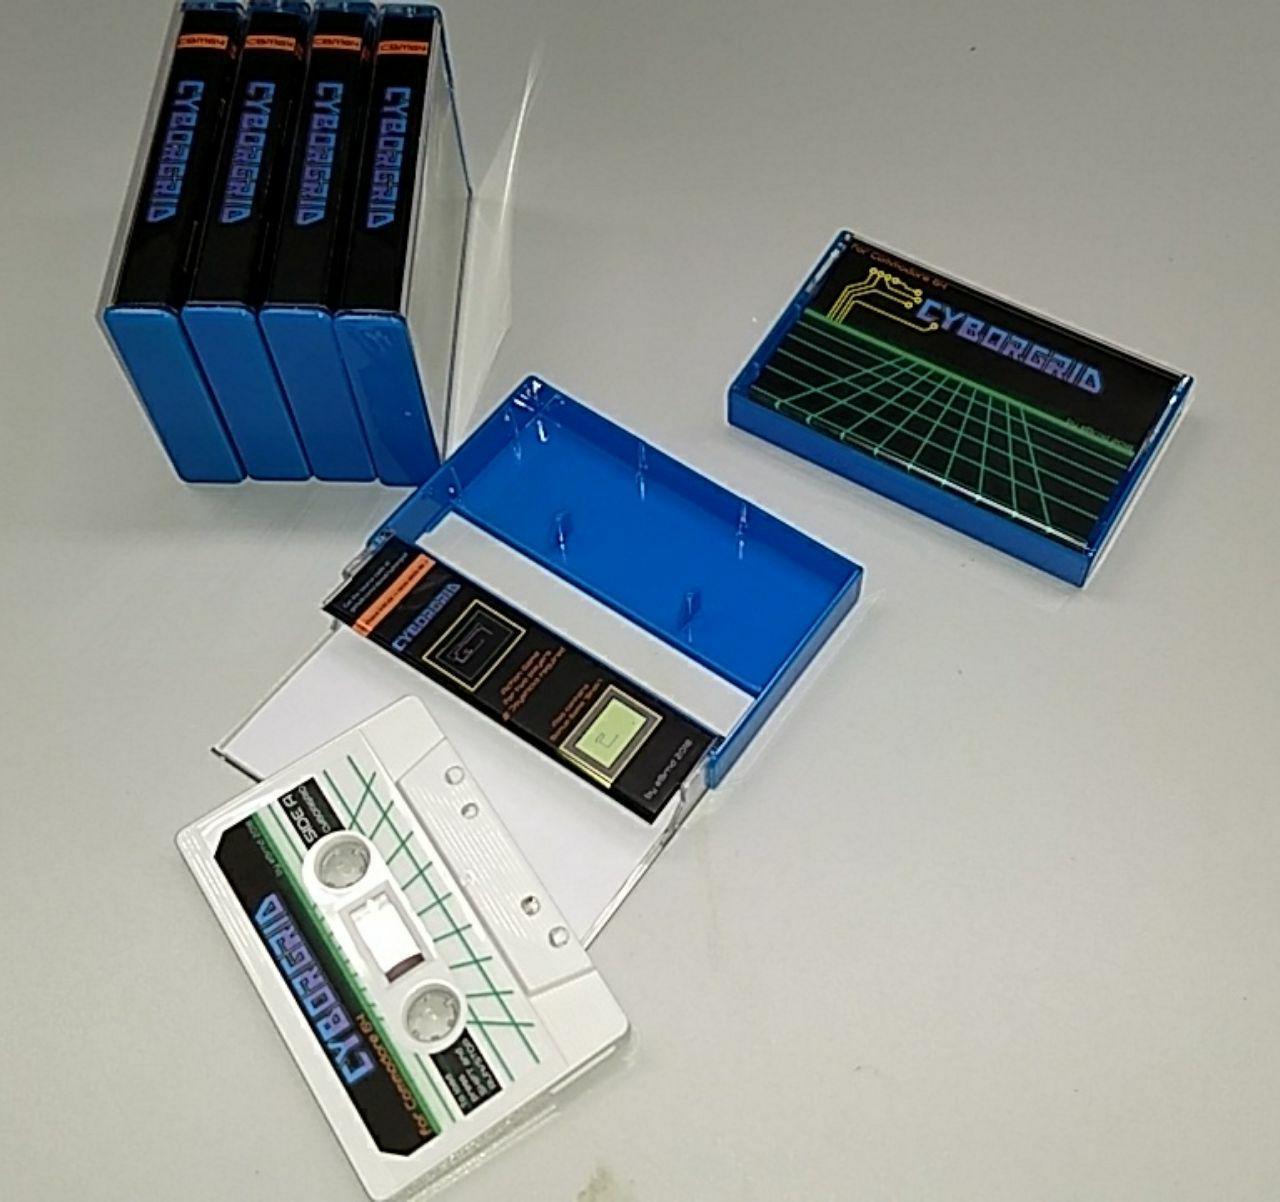 Cassettes with the game Cyborgrid on them with colorful labels.